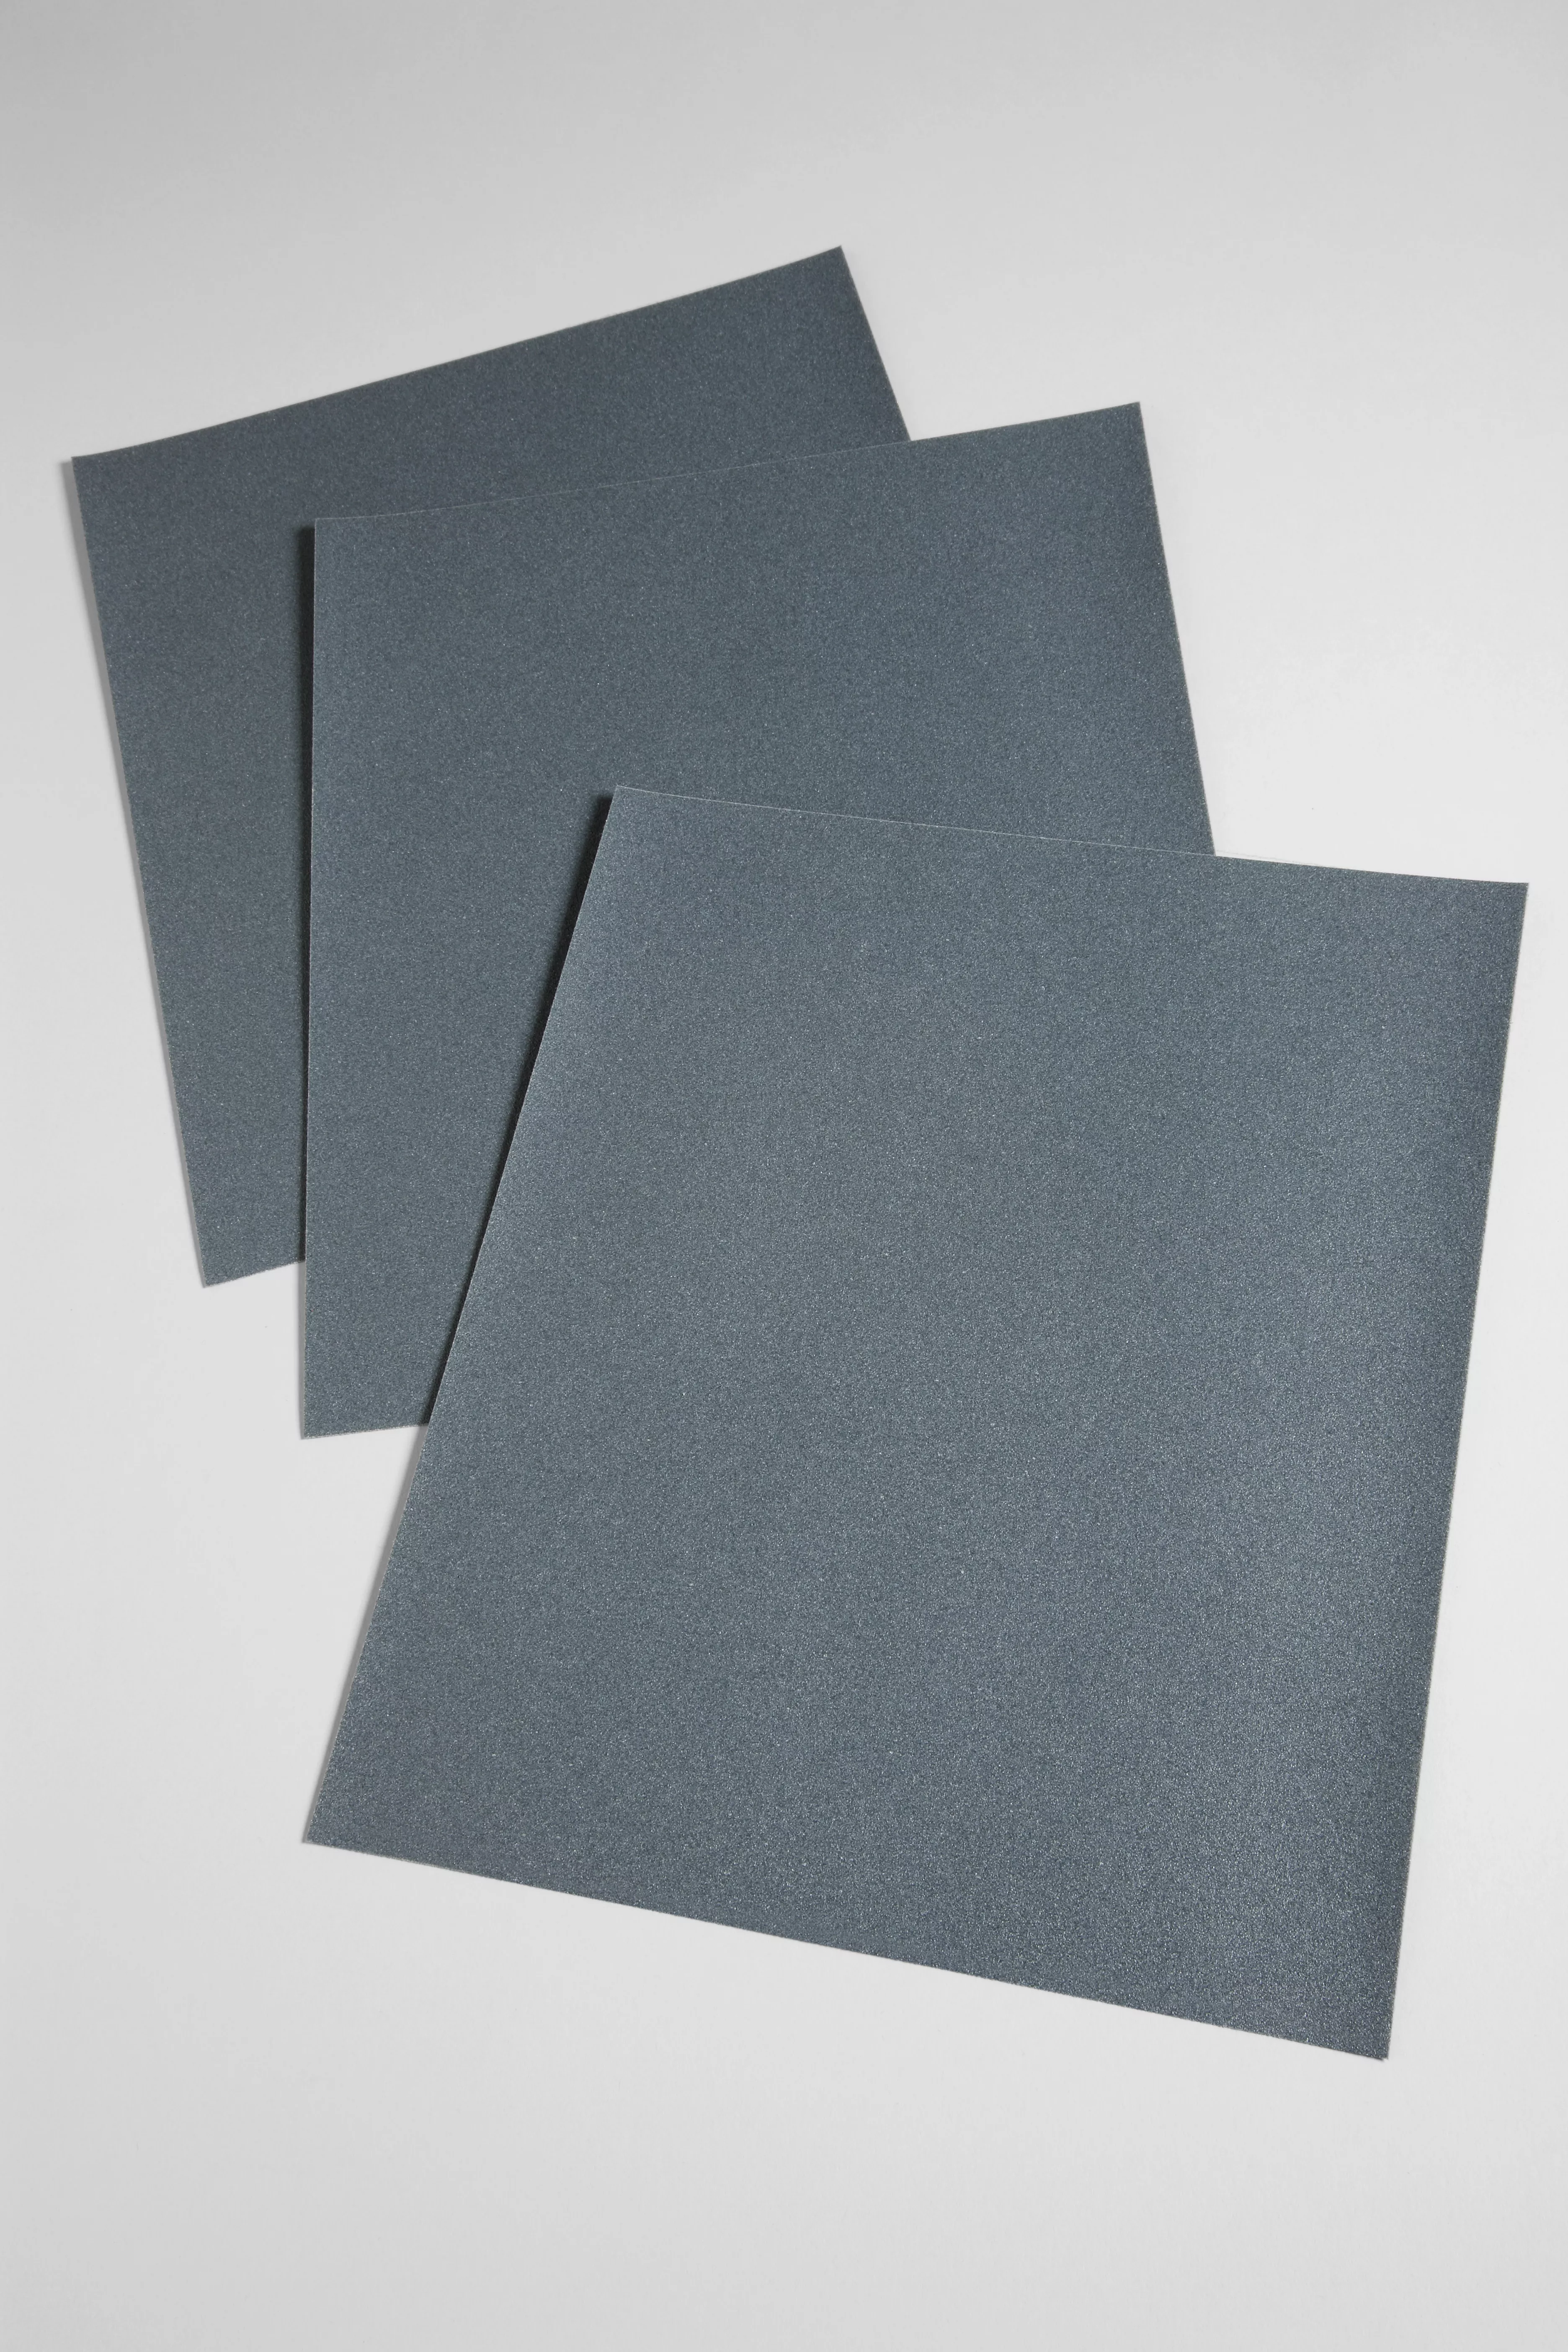 3M™ Wetordry™ Paper Sheet 431Q, 240 C-weight, 9 in x 11 in, 50/Pac, 500
ea/Case